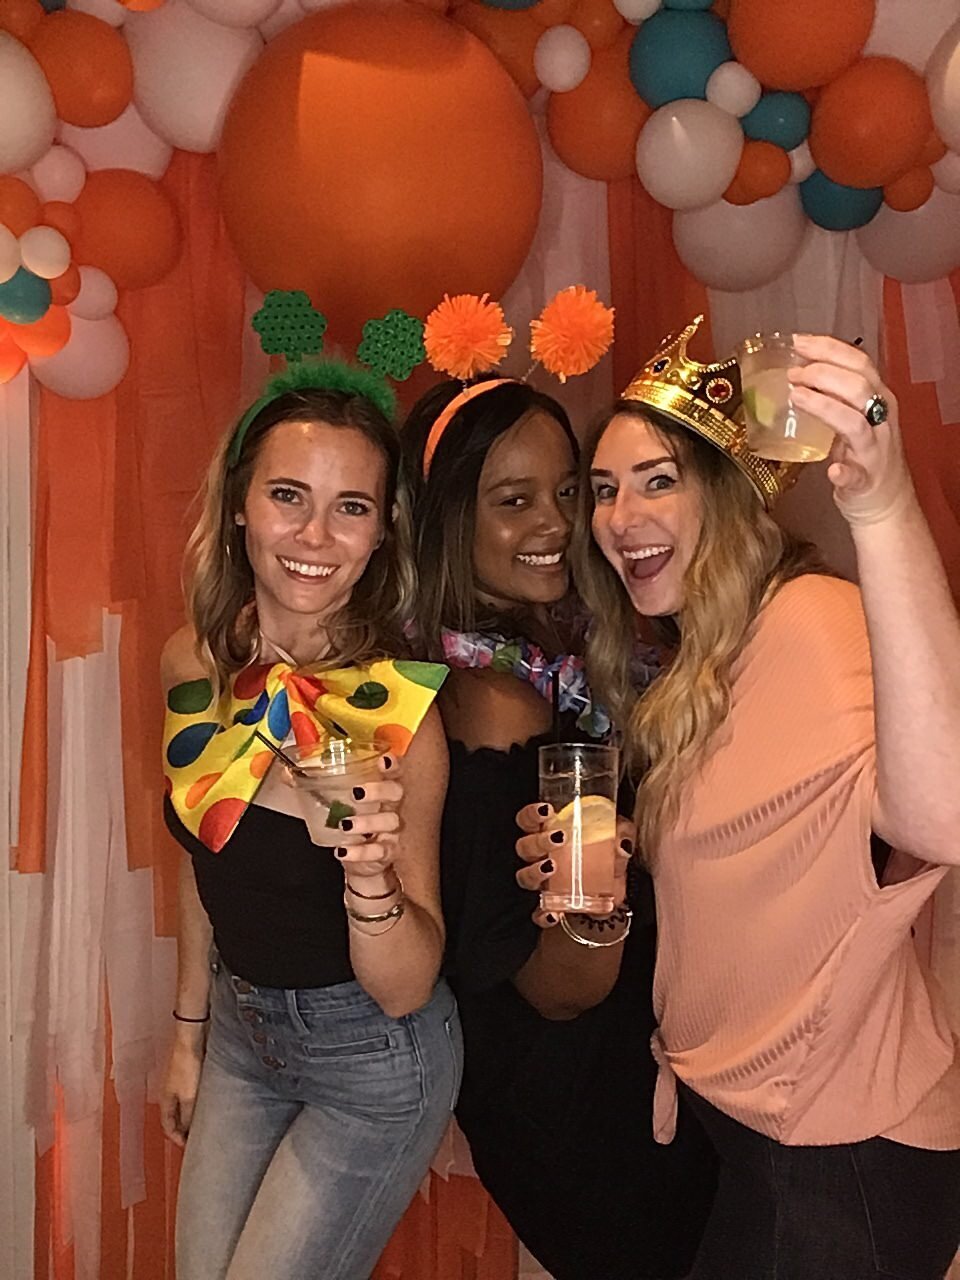 Girls cheersing together with an Orange photobooth background